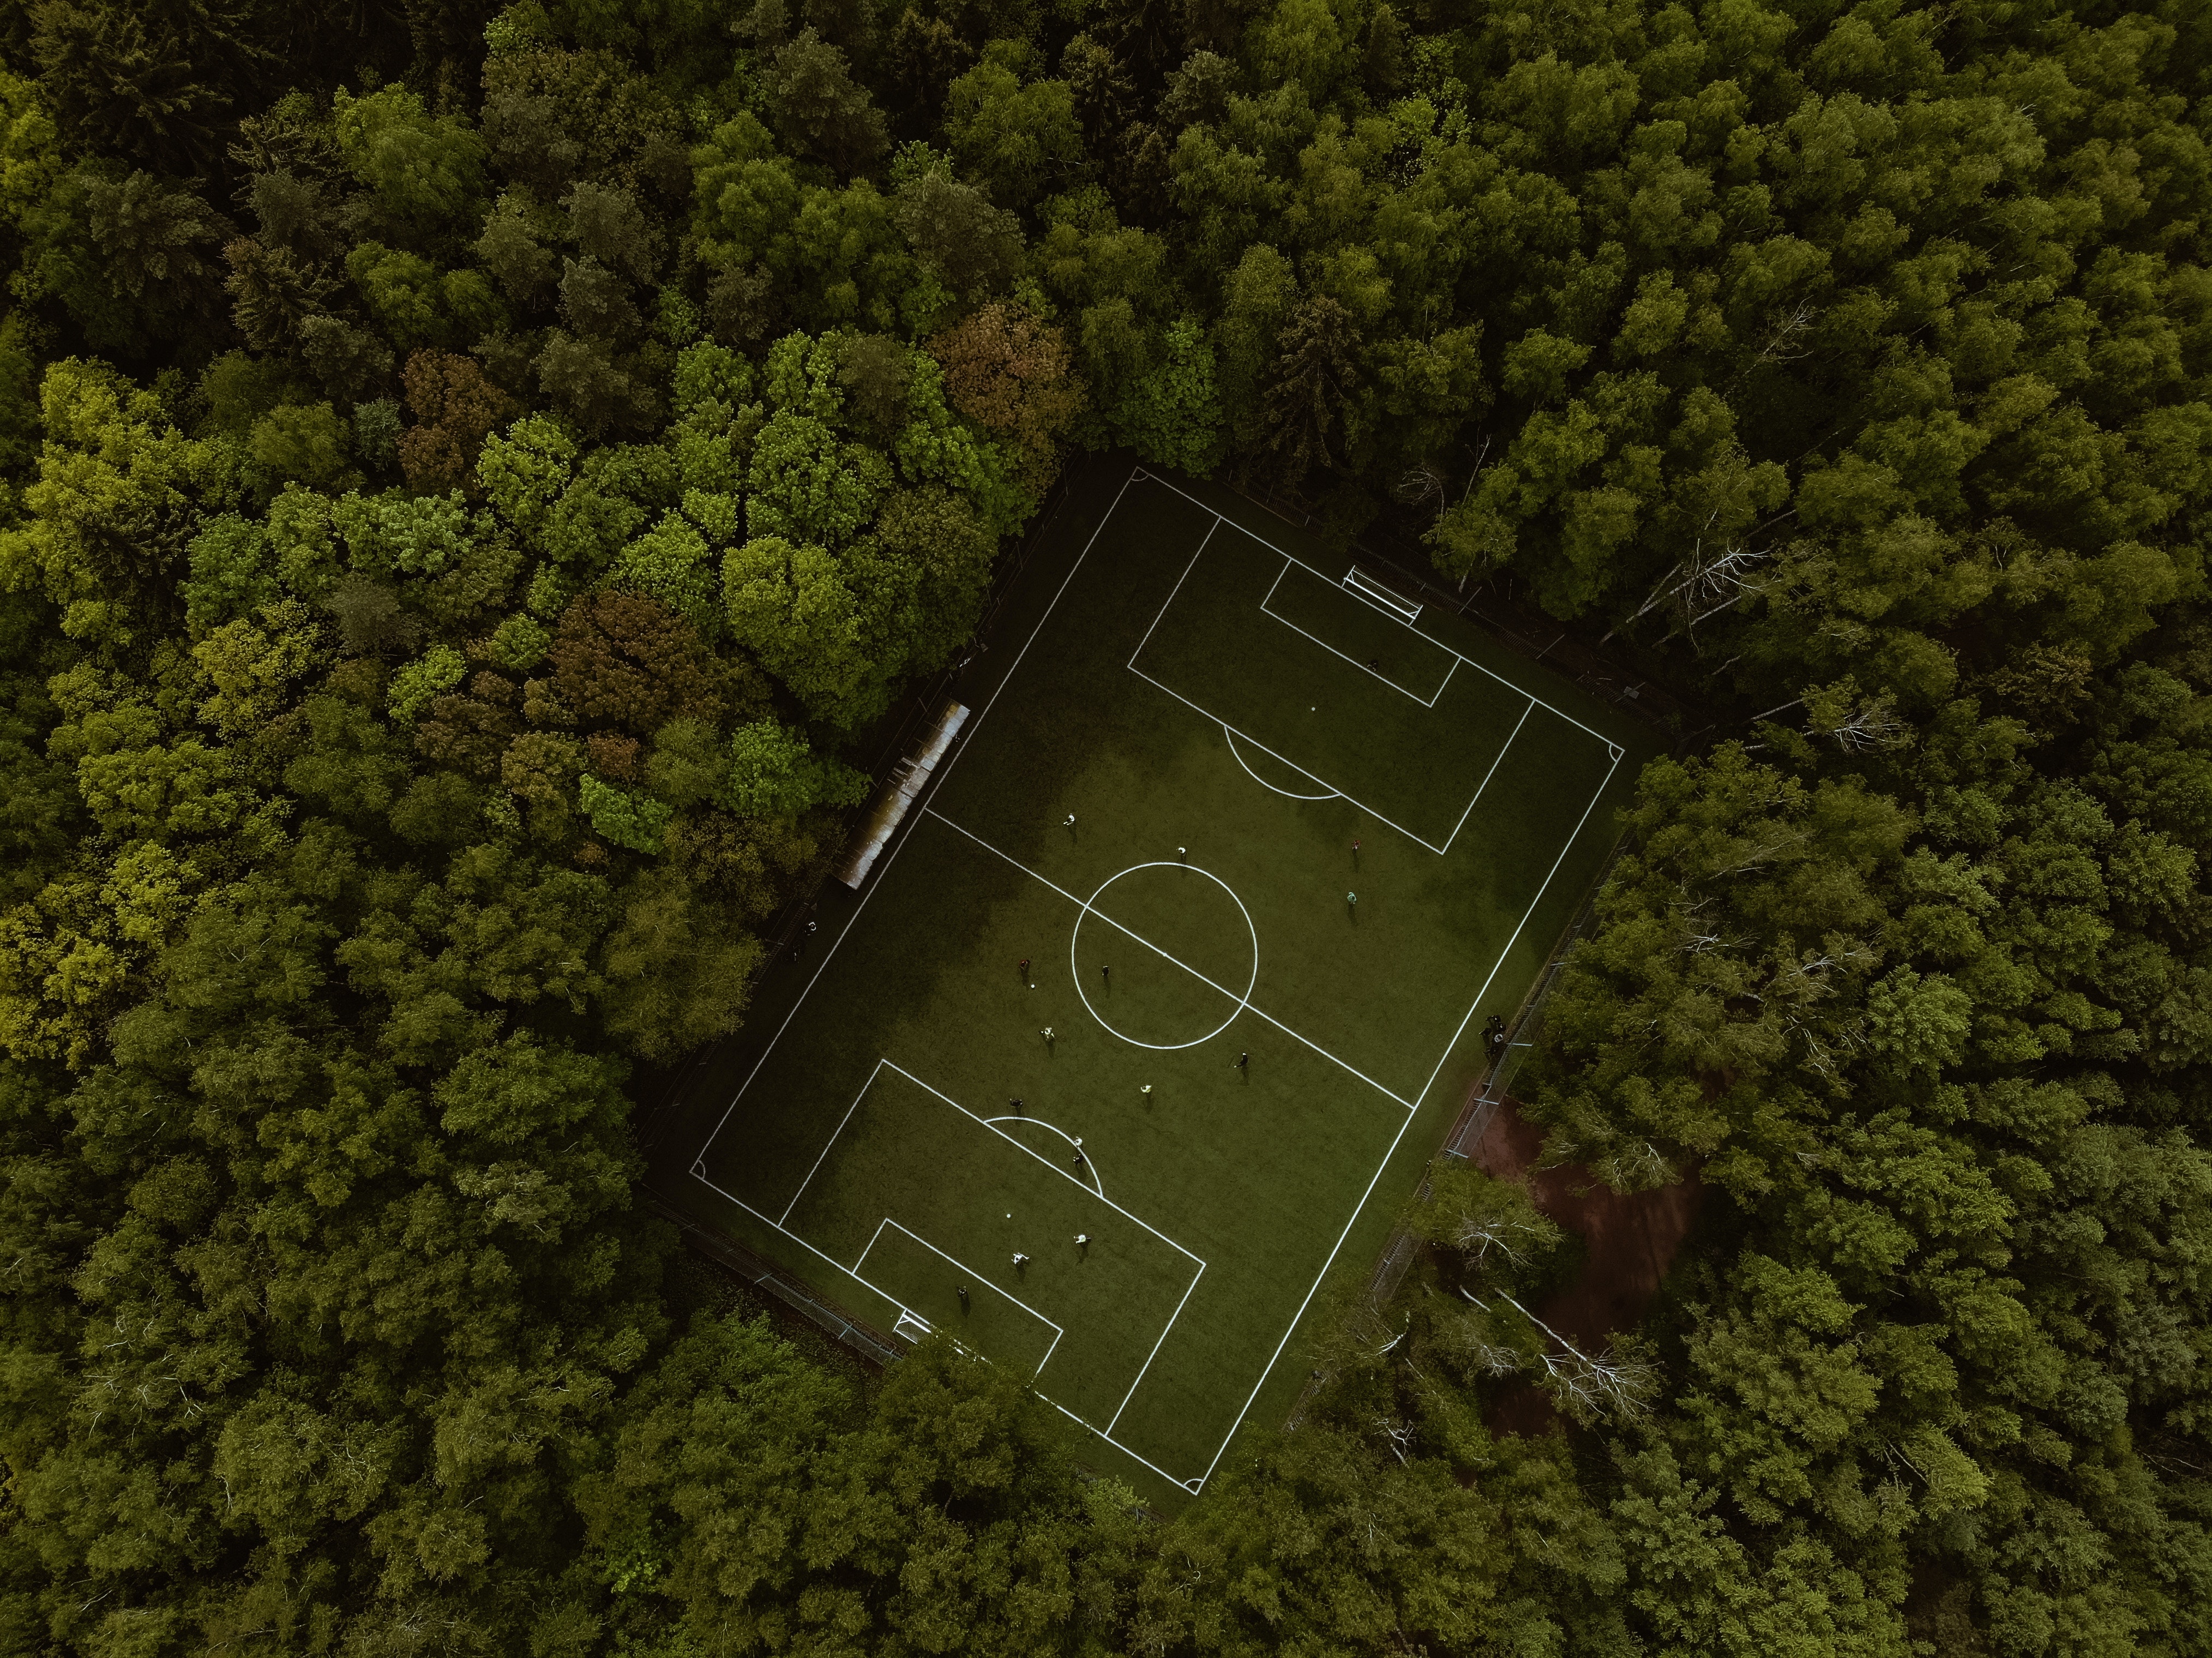 ariel view of soccer field in page